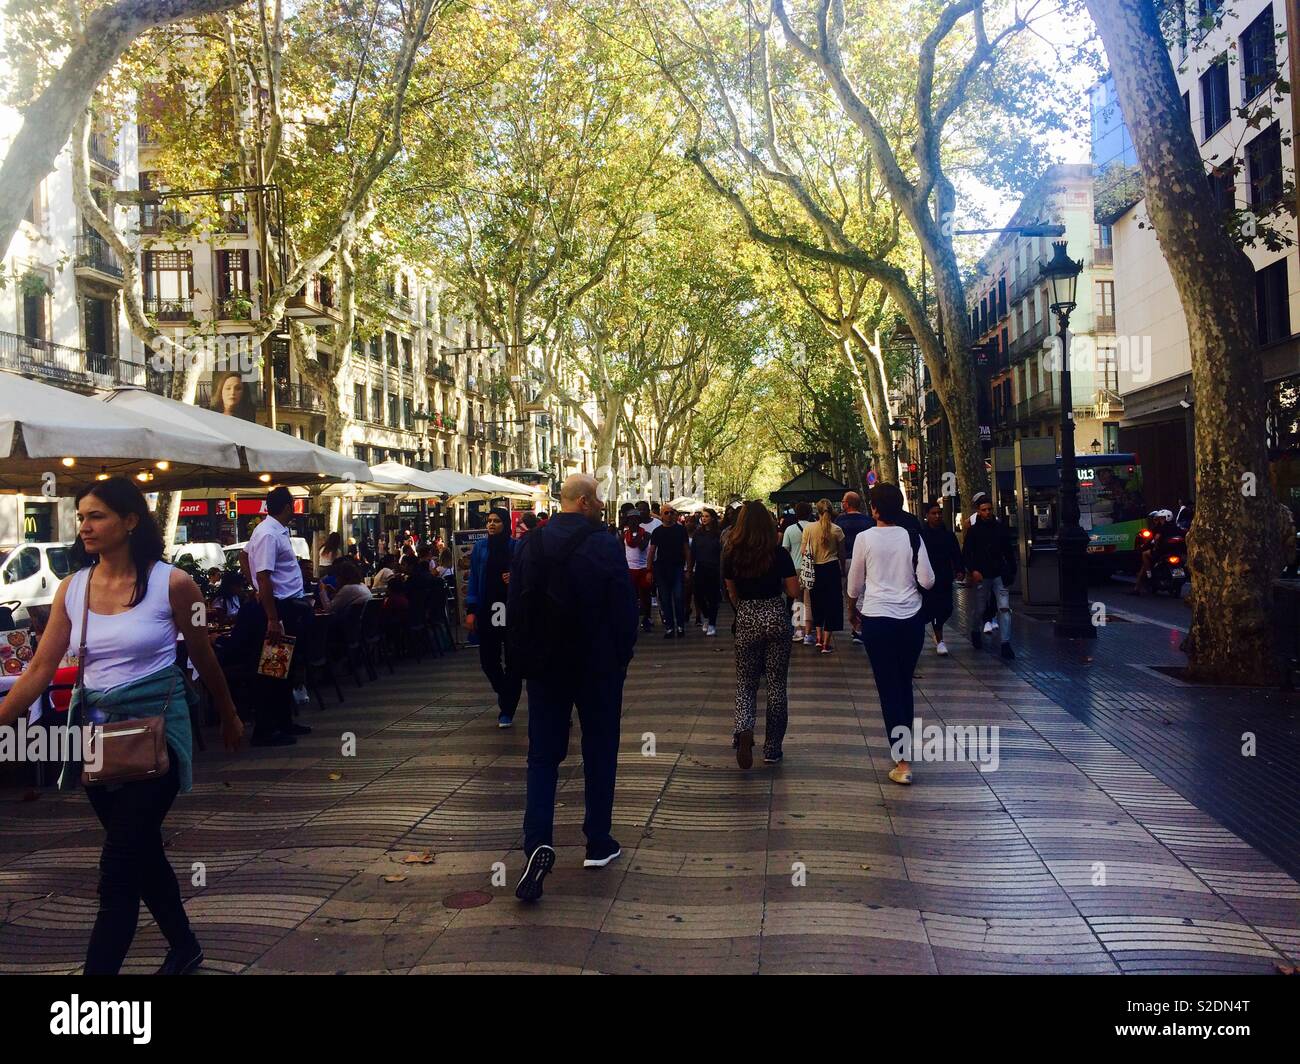 La Rambla a busy walkway or pedestrian section in Barcelona city centre Spain on a sunny Autumn day Stock Photo